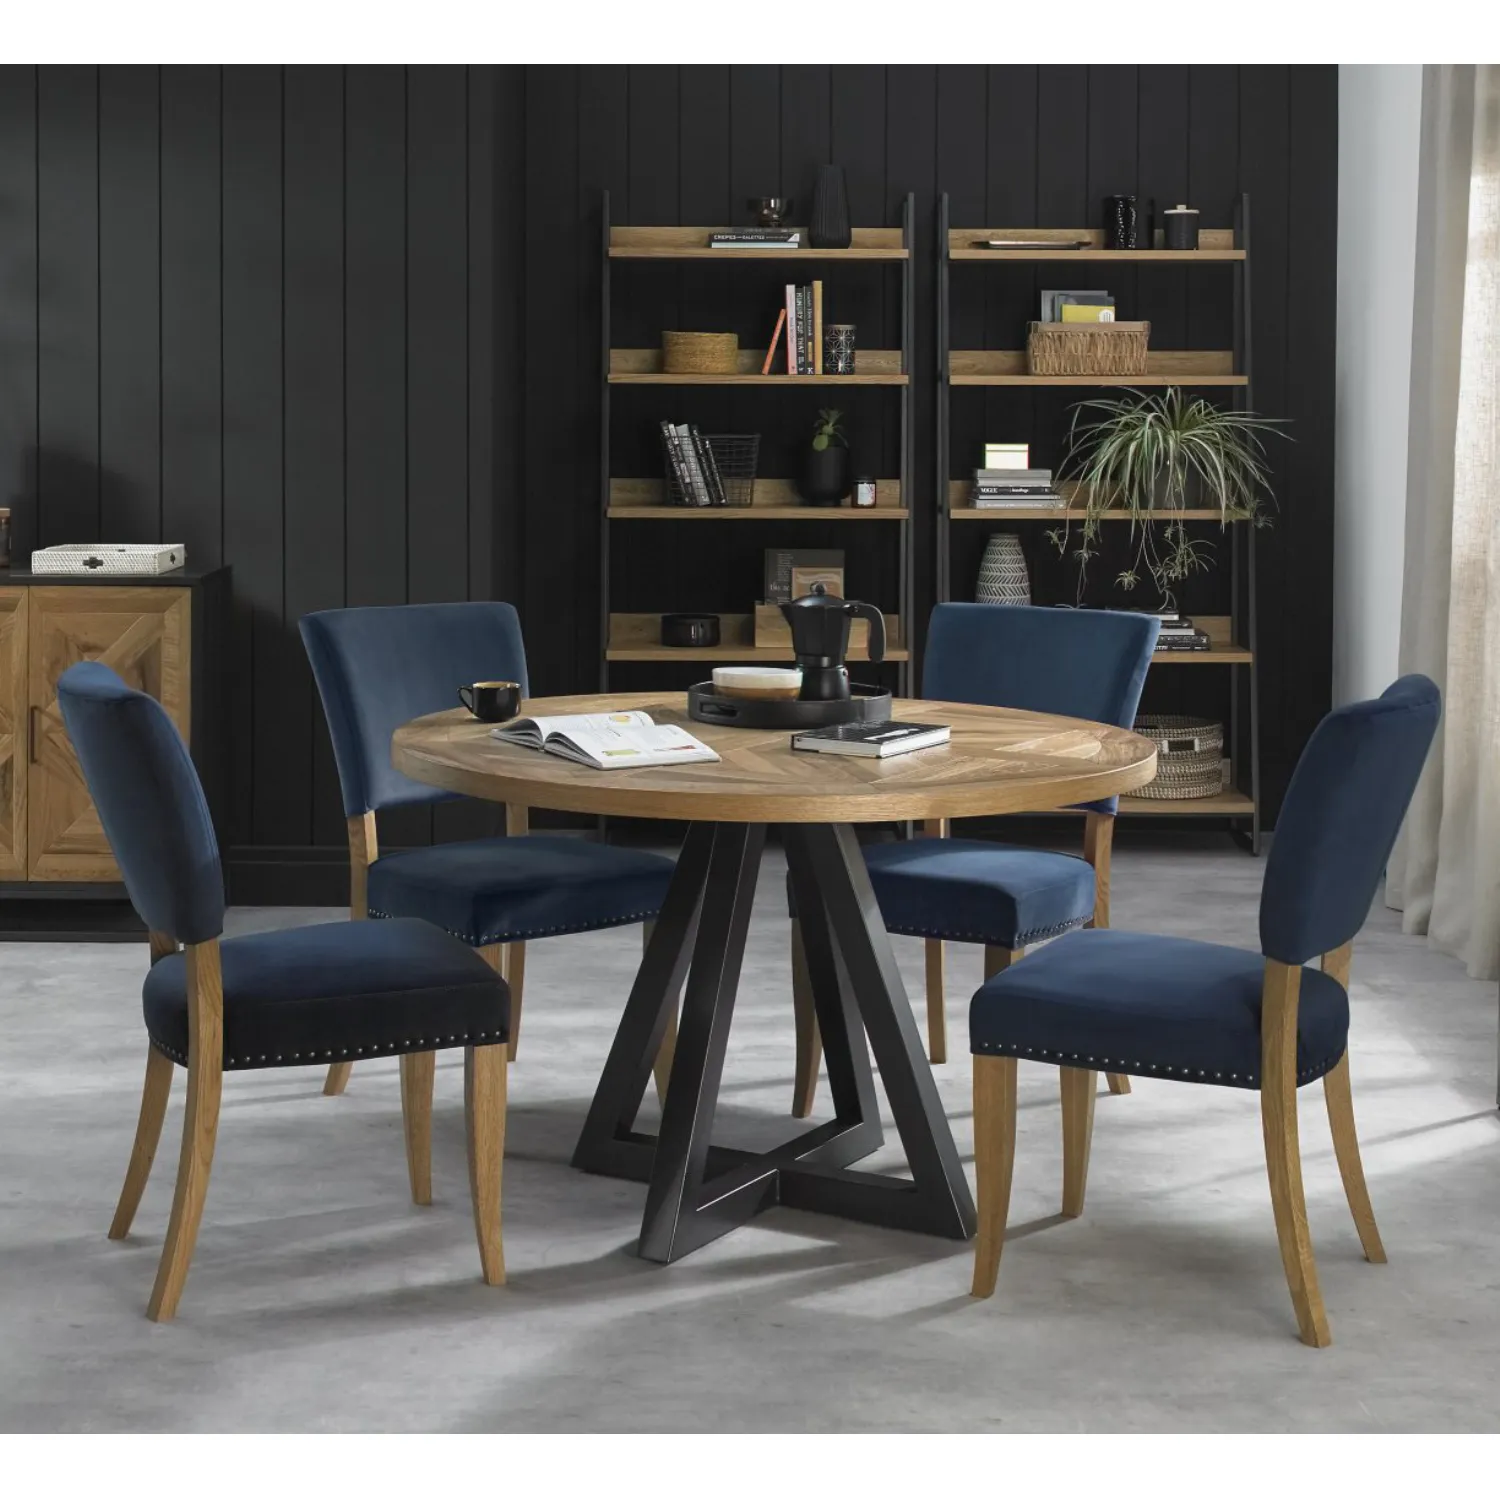 Rustic Oak Round Dining Table Set 4 Blue Velvet Chairs